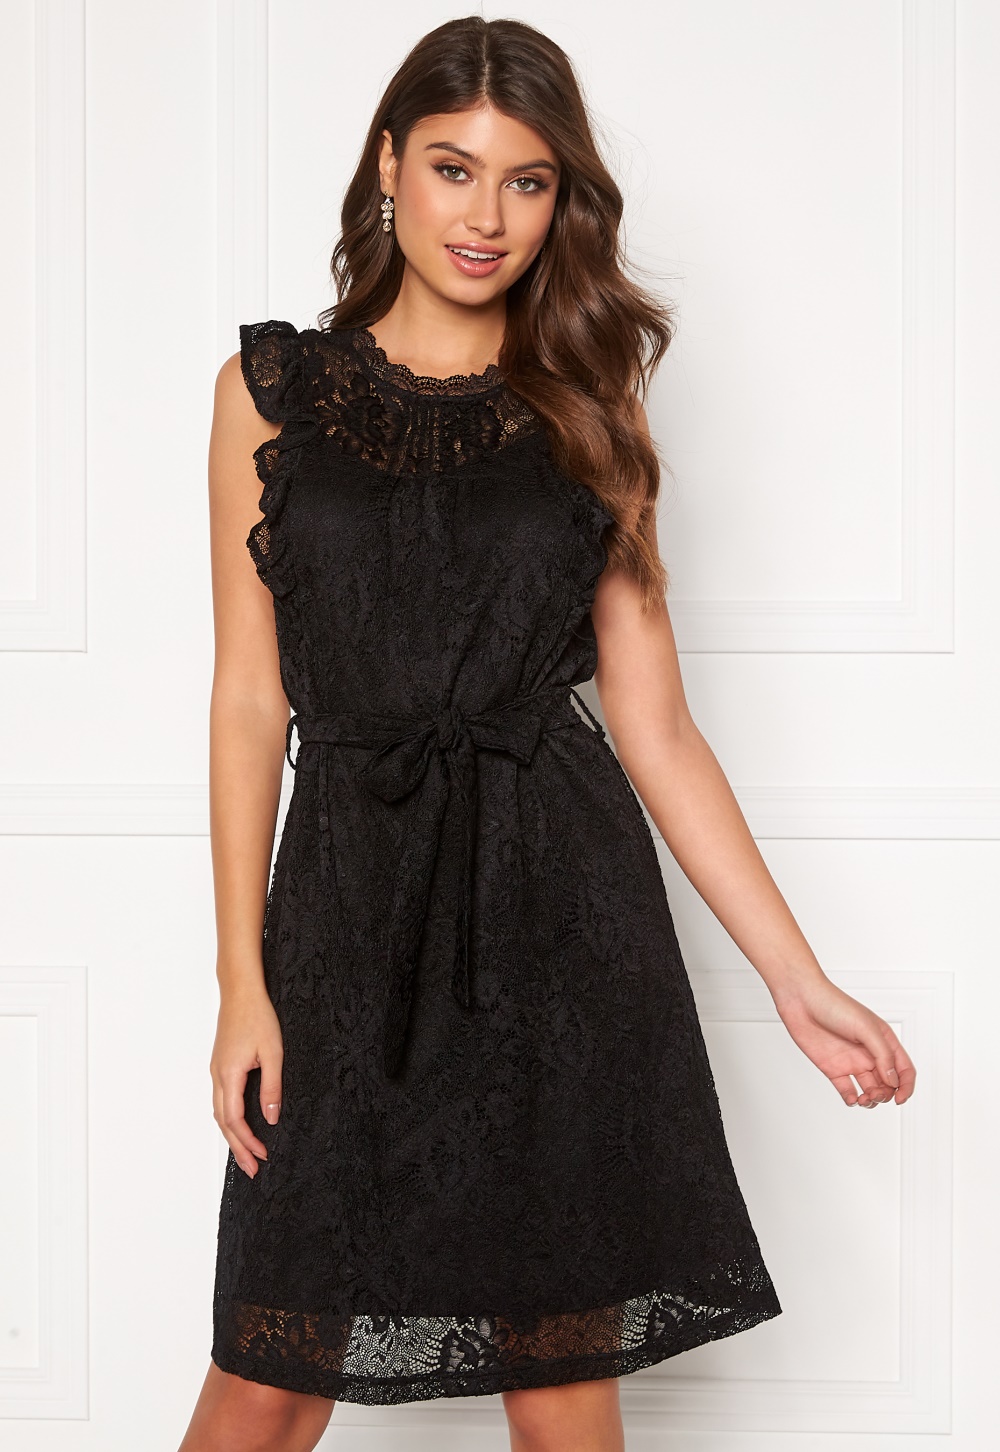 Sisters Point Etto Dress 000 Black